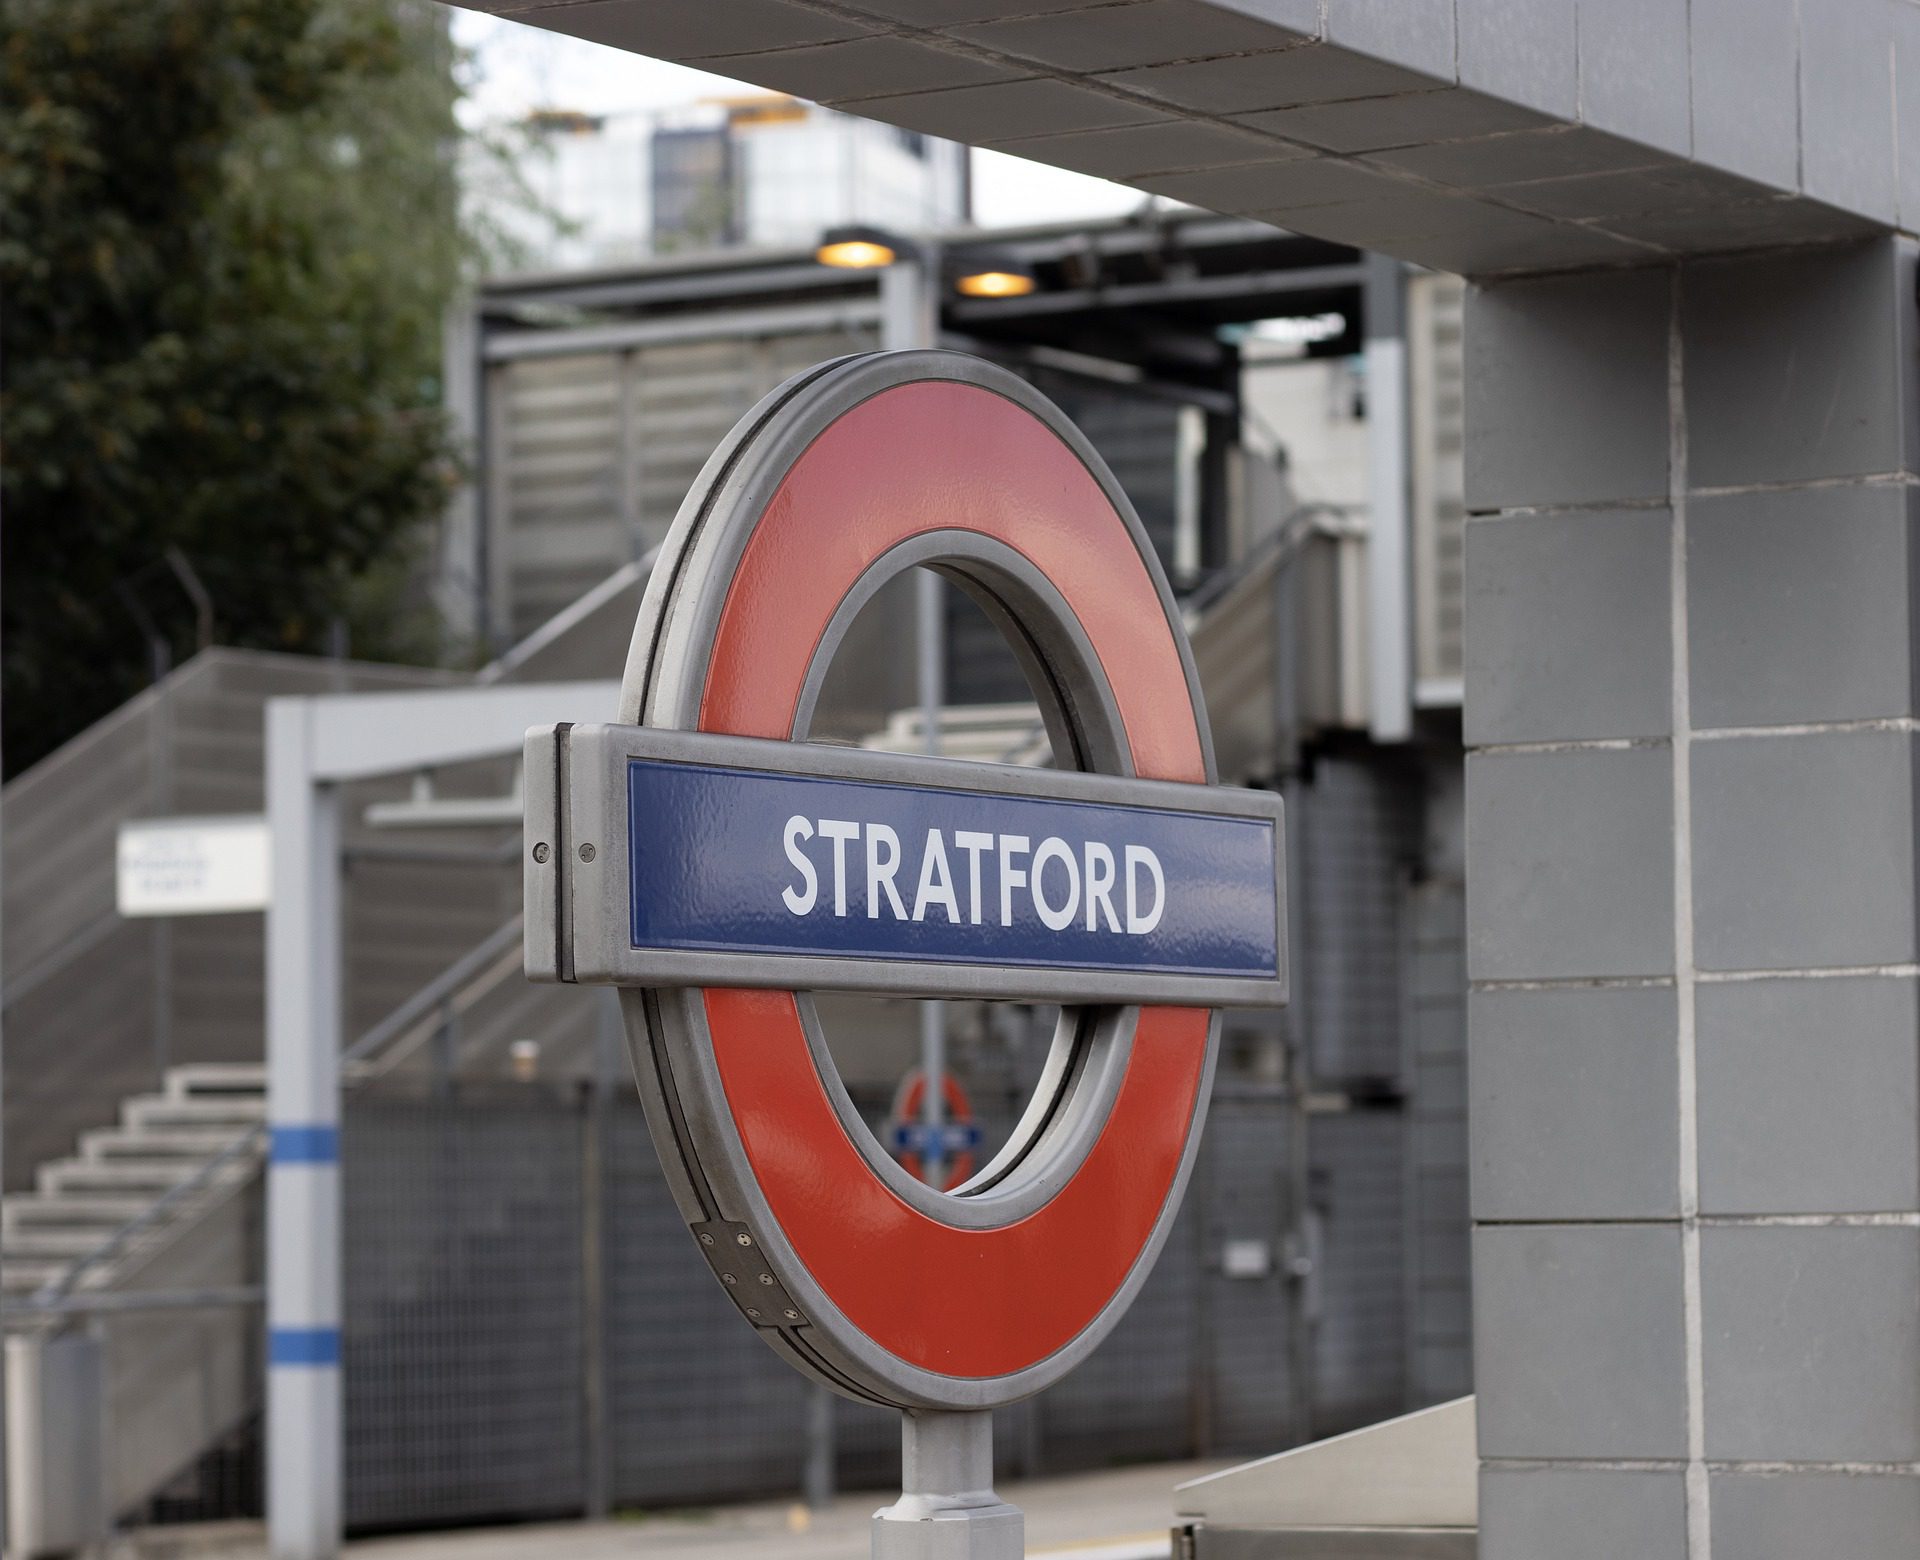 Quick London Guides: Things To Do in Stratford